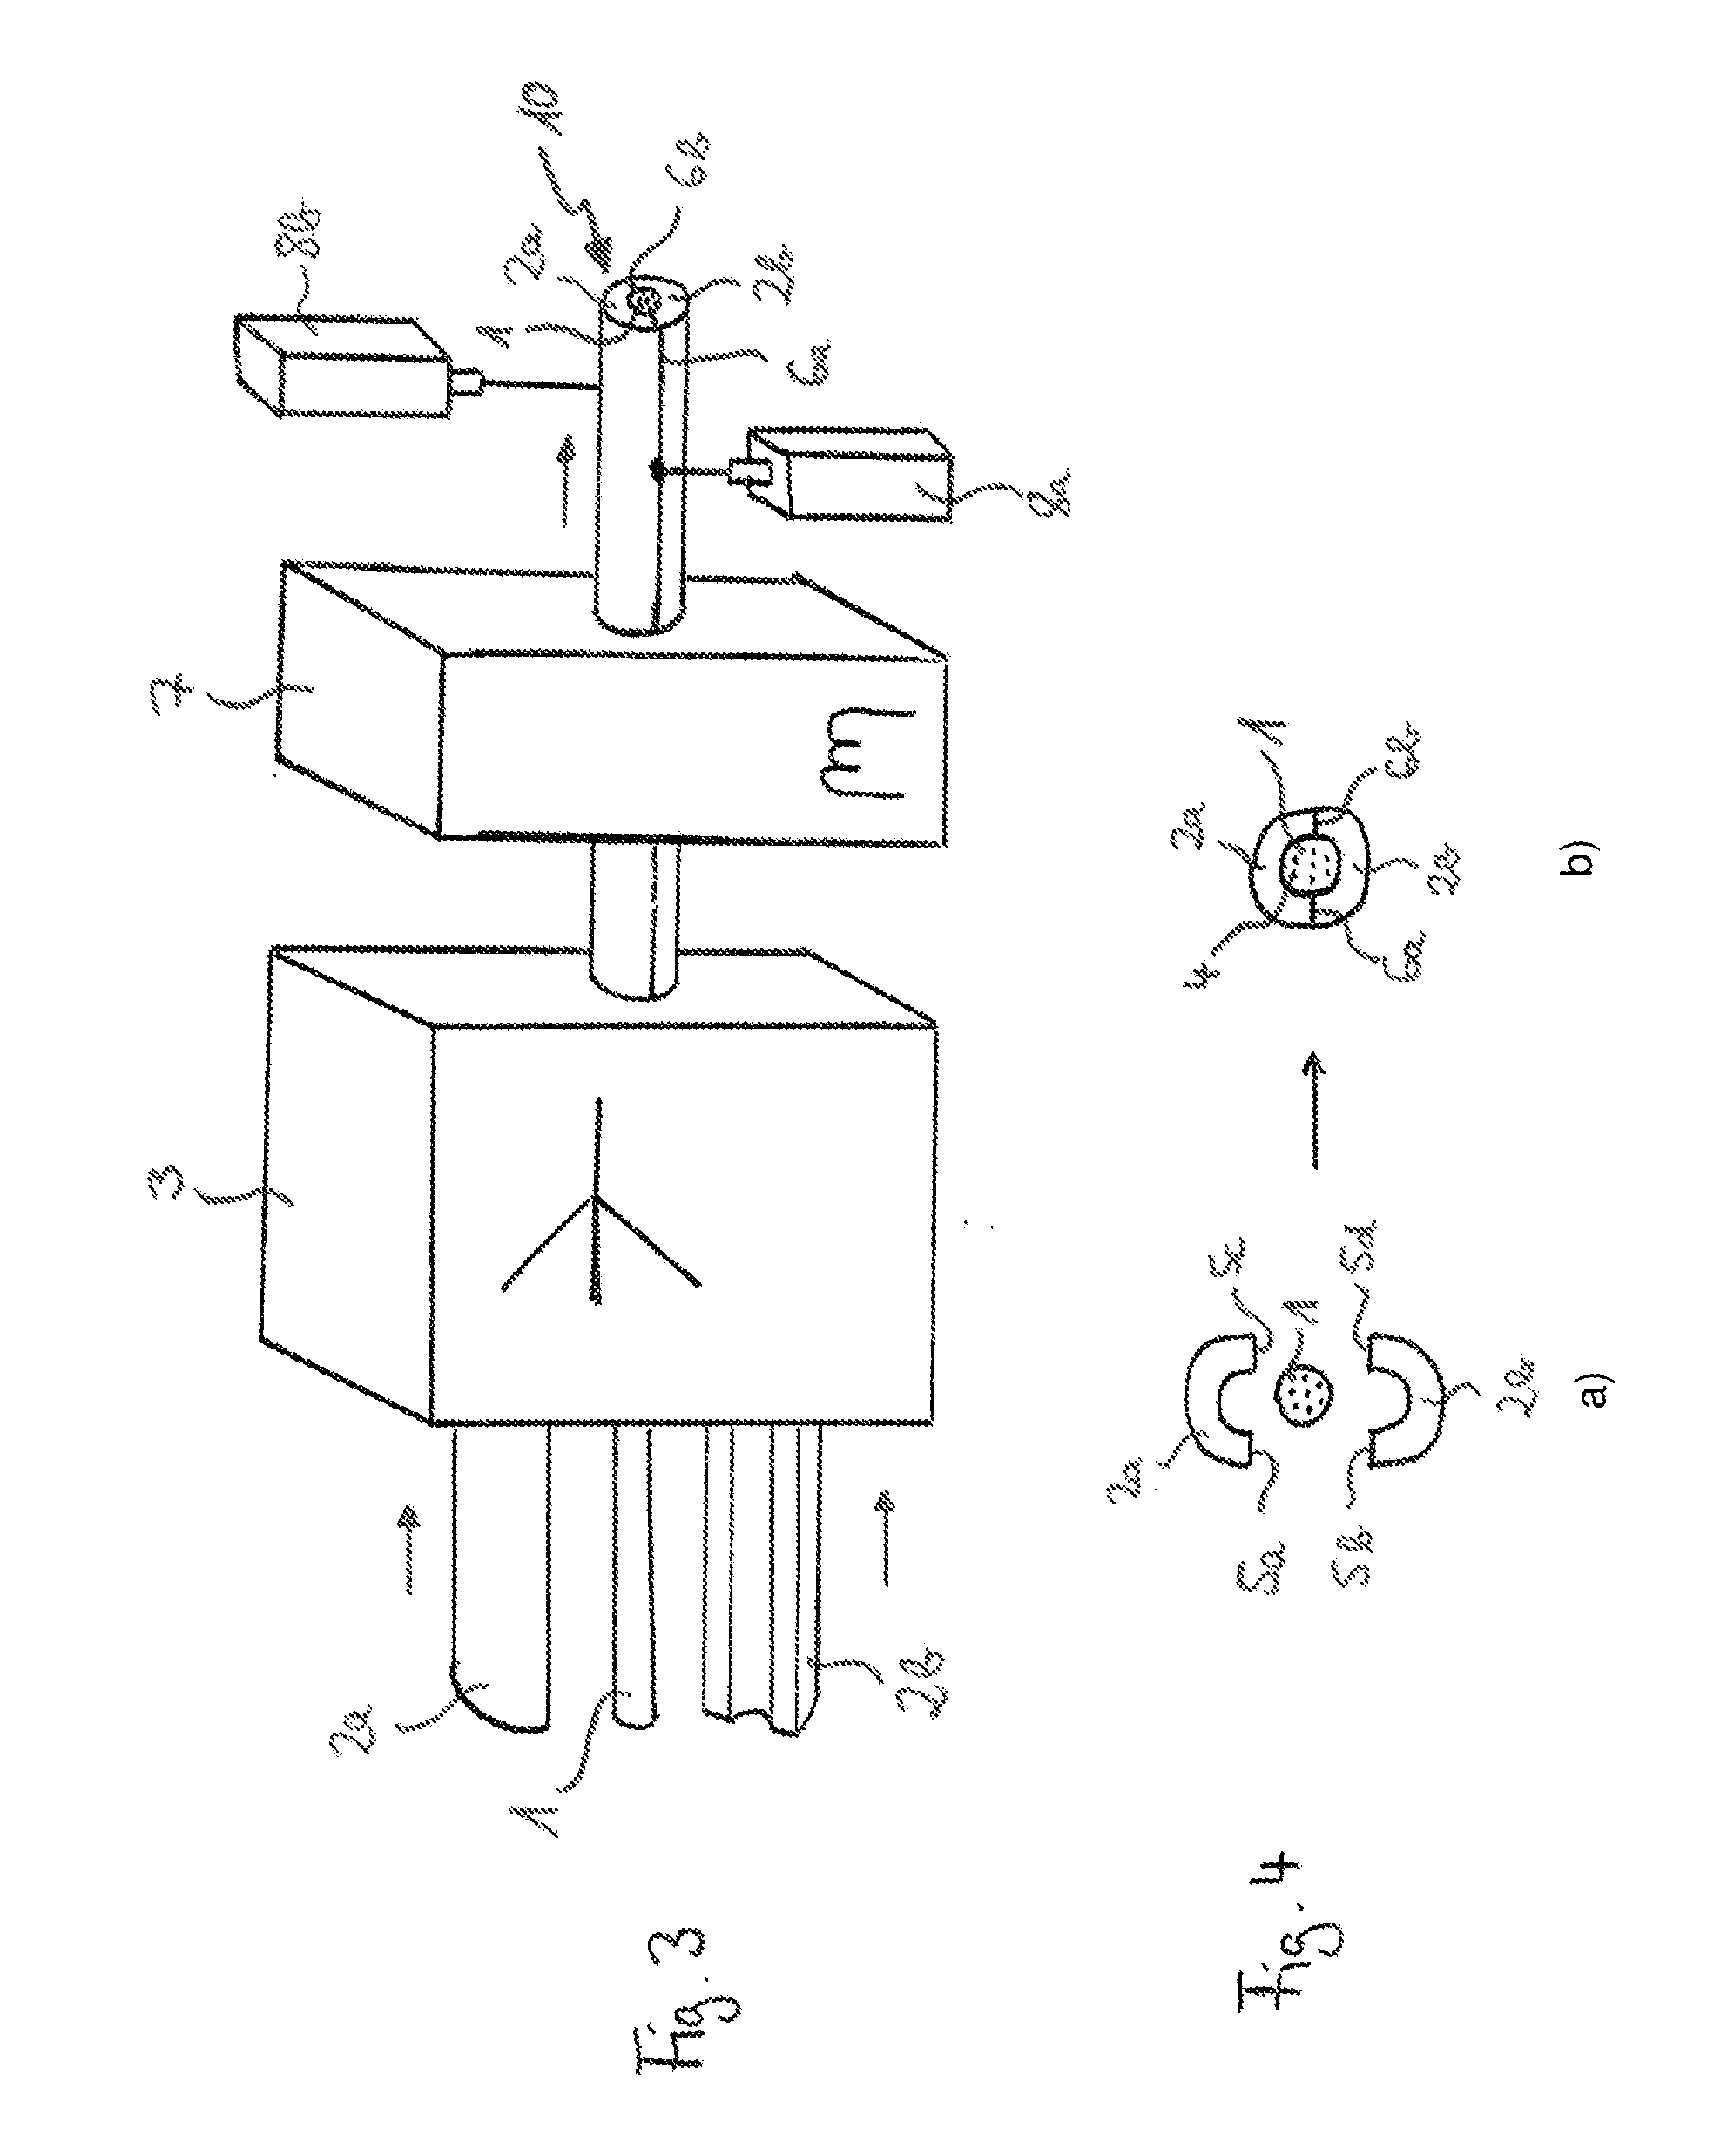 Method for producing a superconducting wire, in particular using lead-free solder